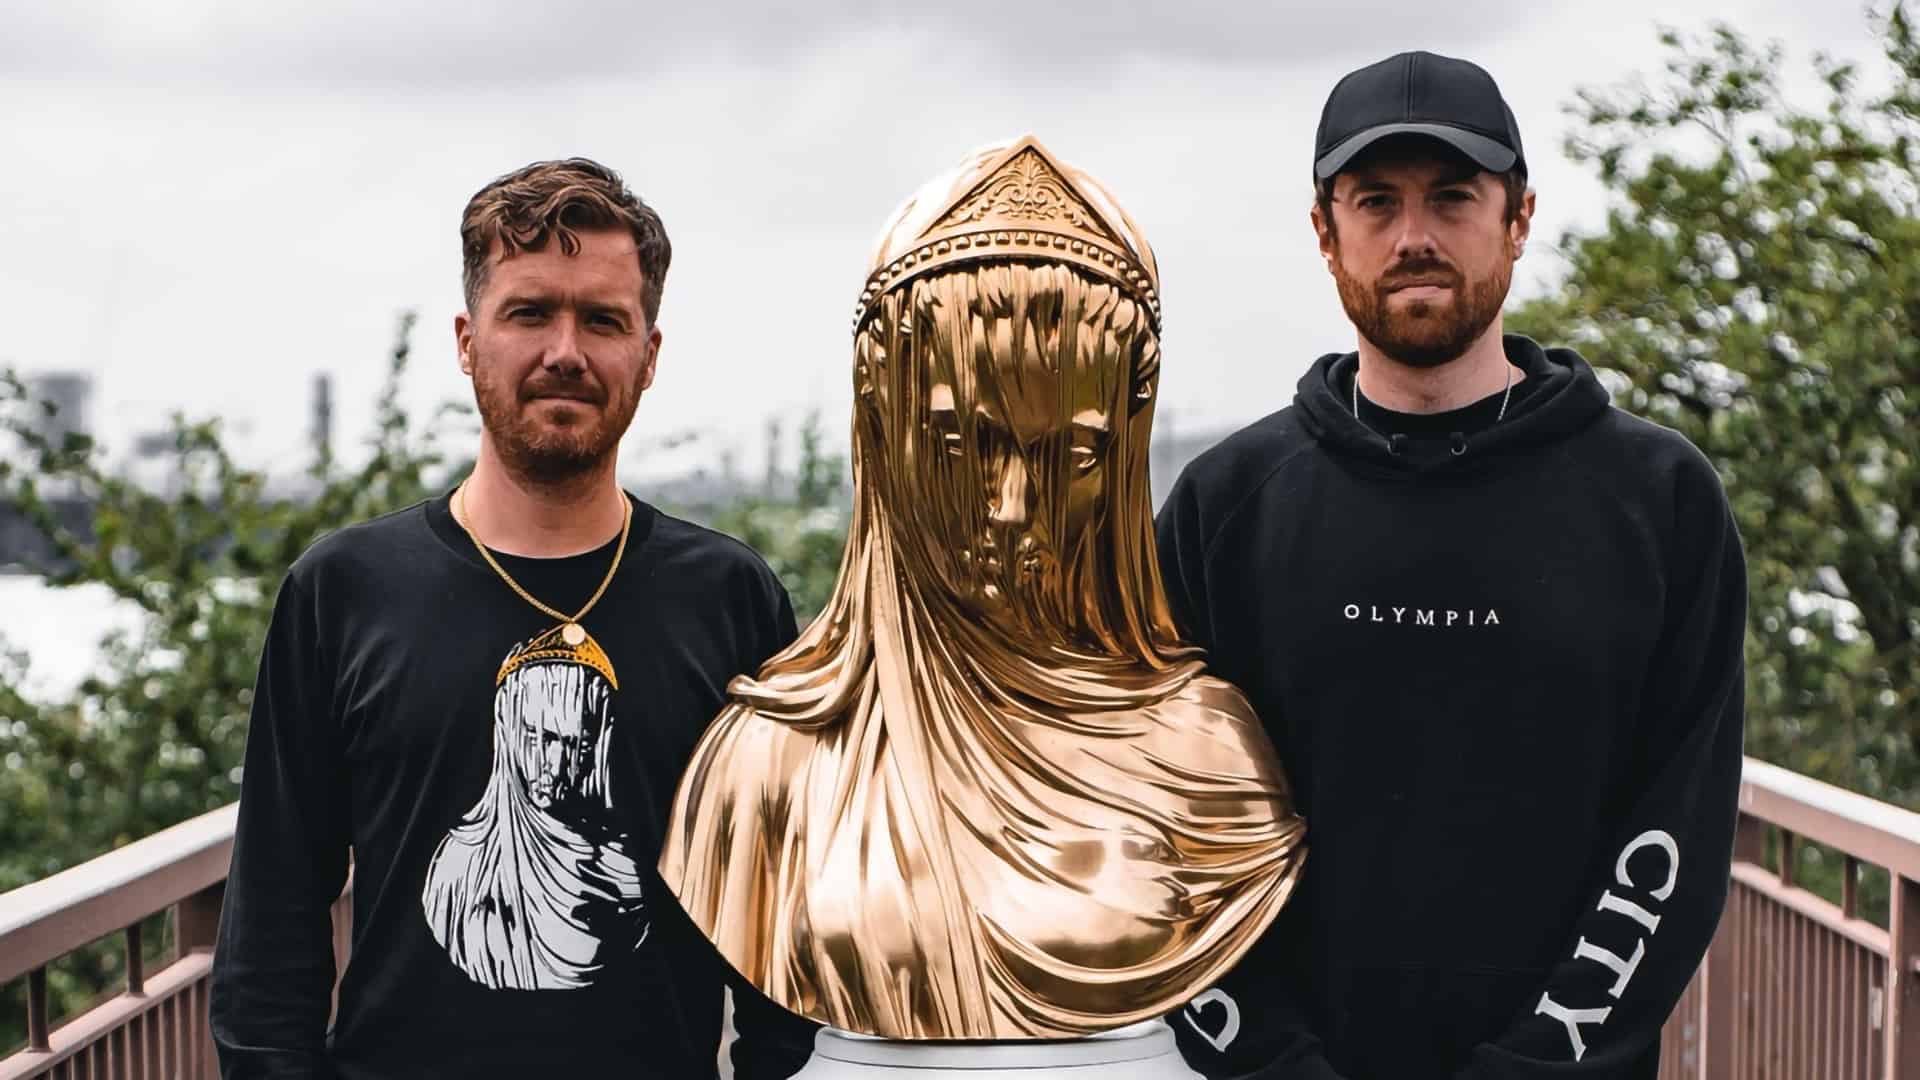 Gorgon City take over summer with godly new album ‘Olympia’: Album Review